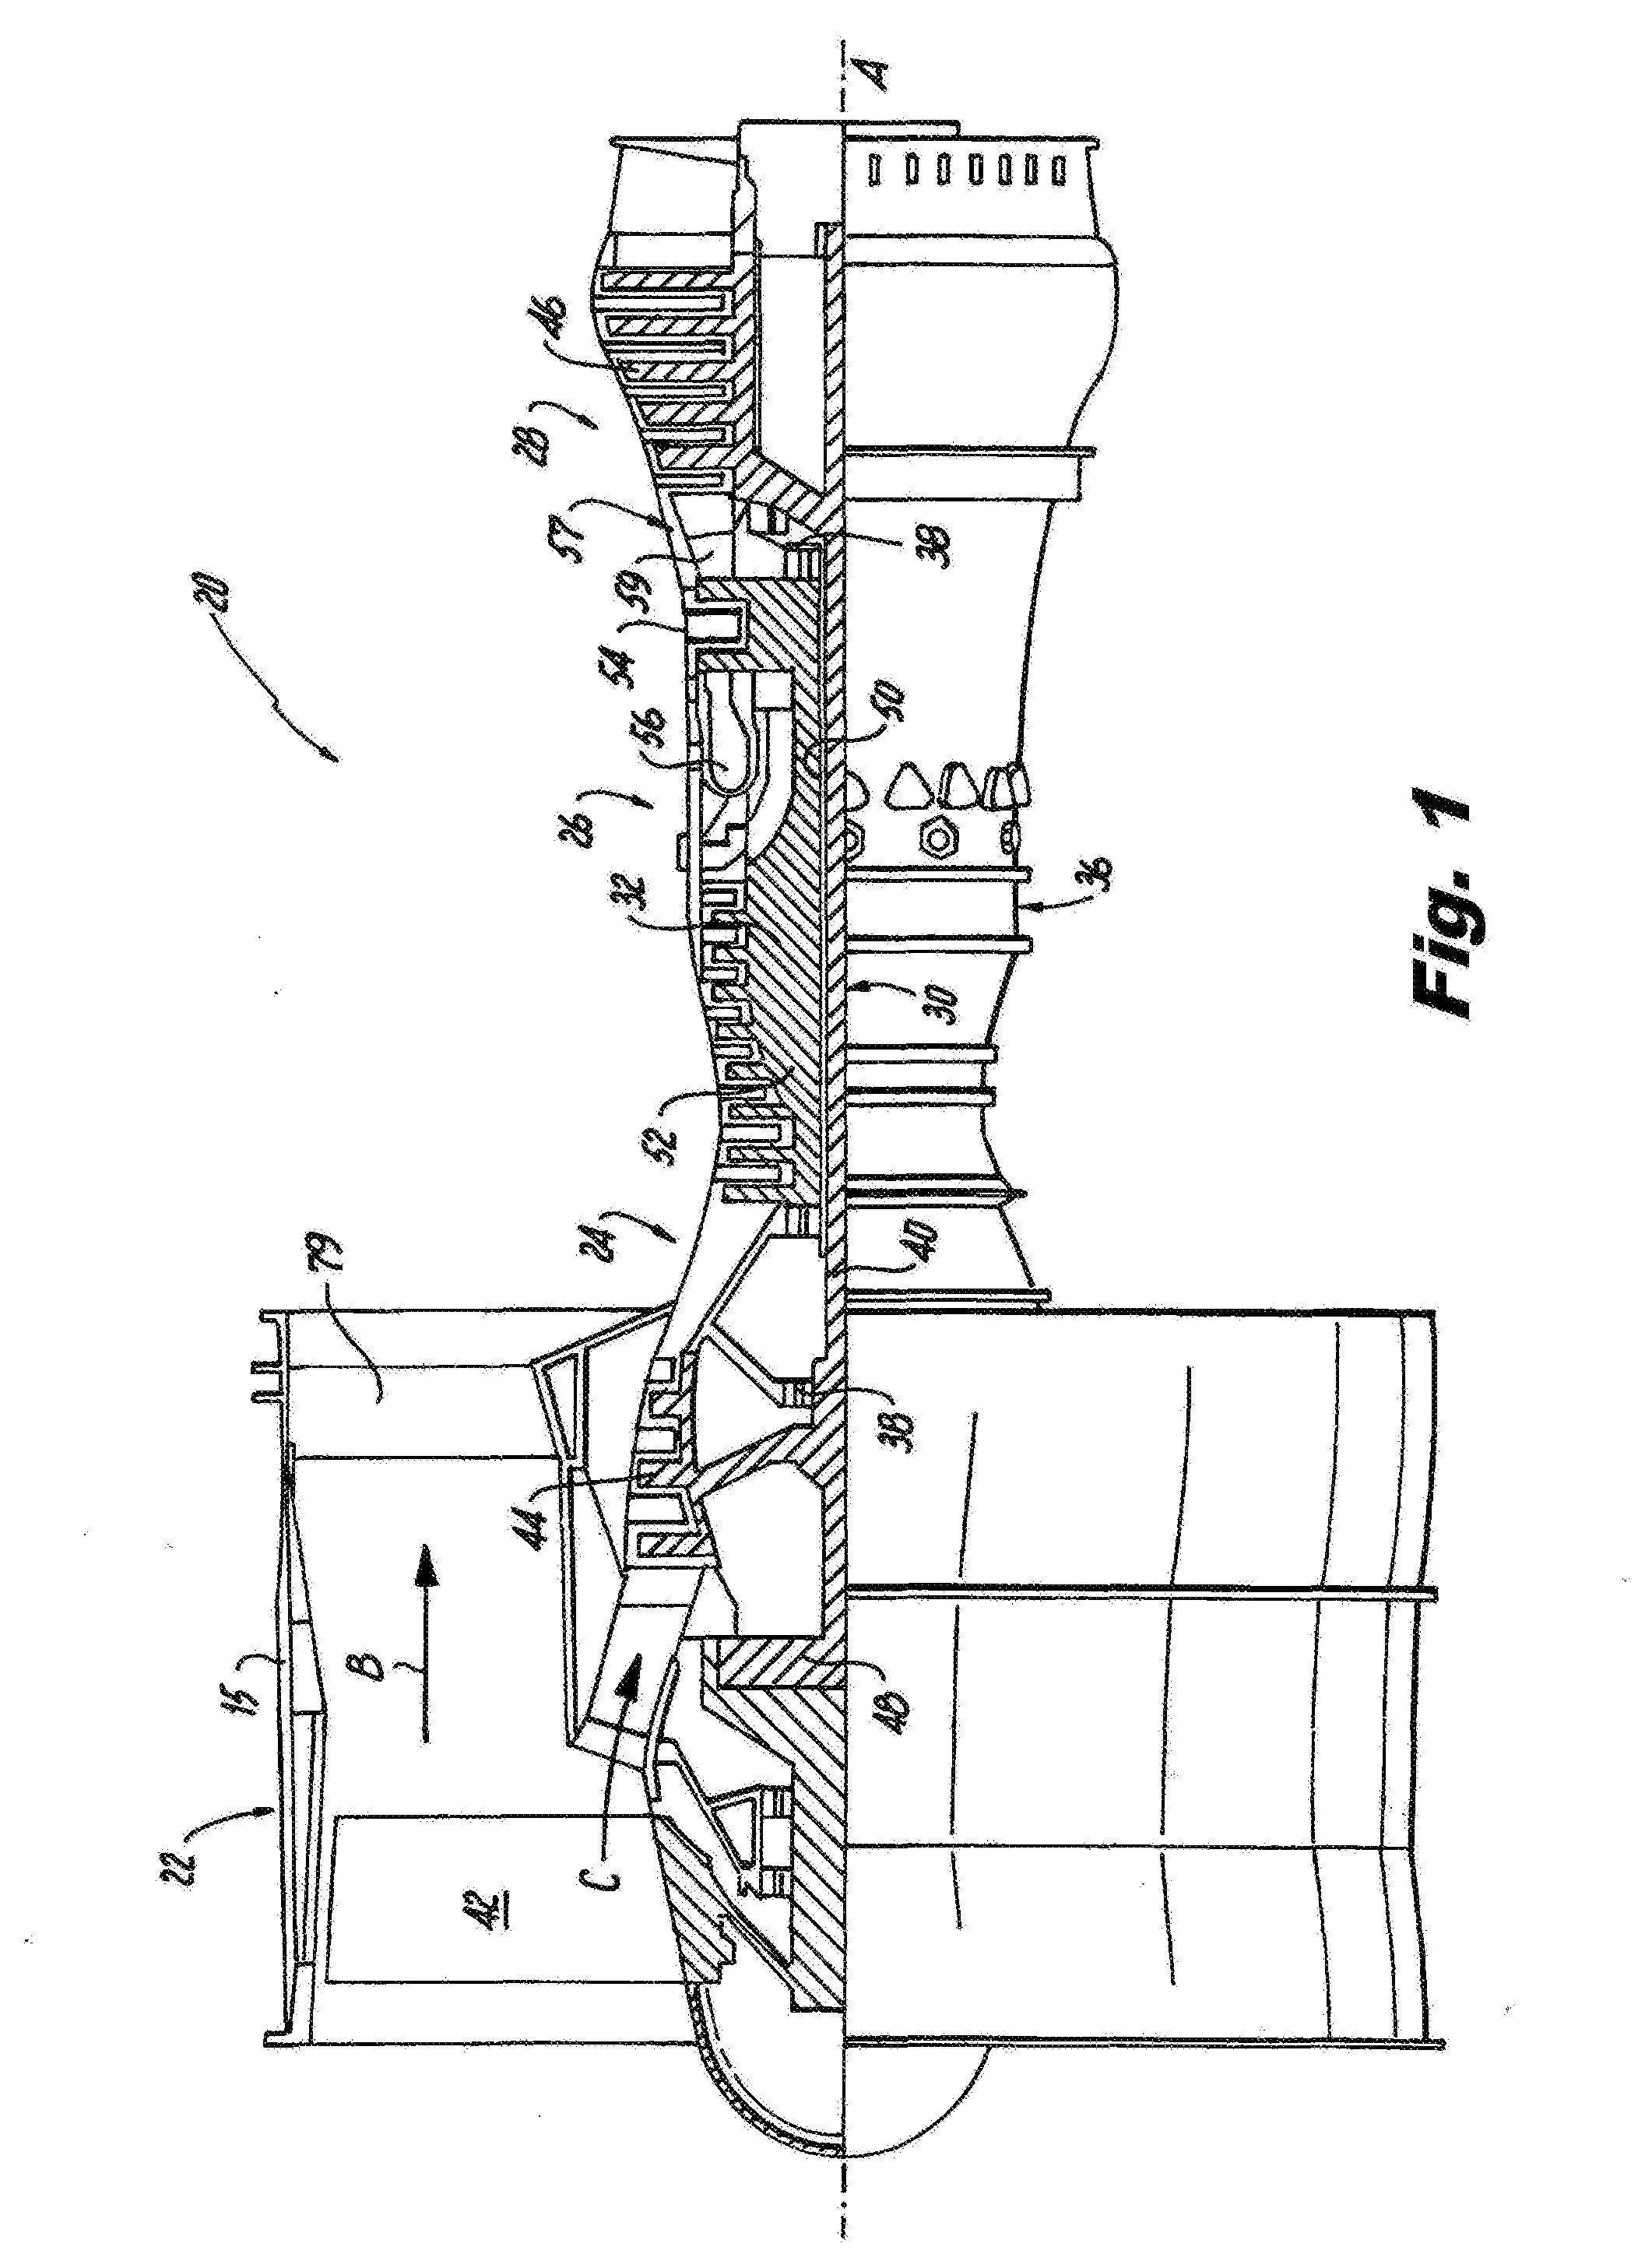 Blade outer air seal with cooling holes